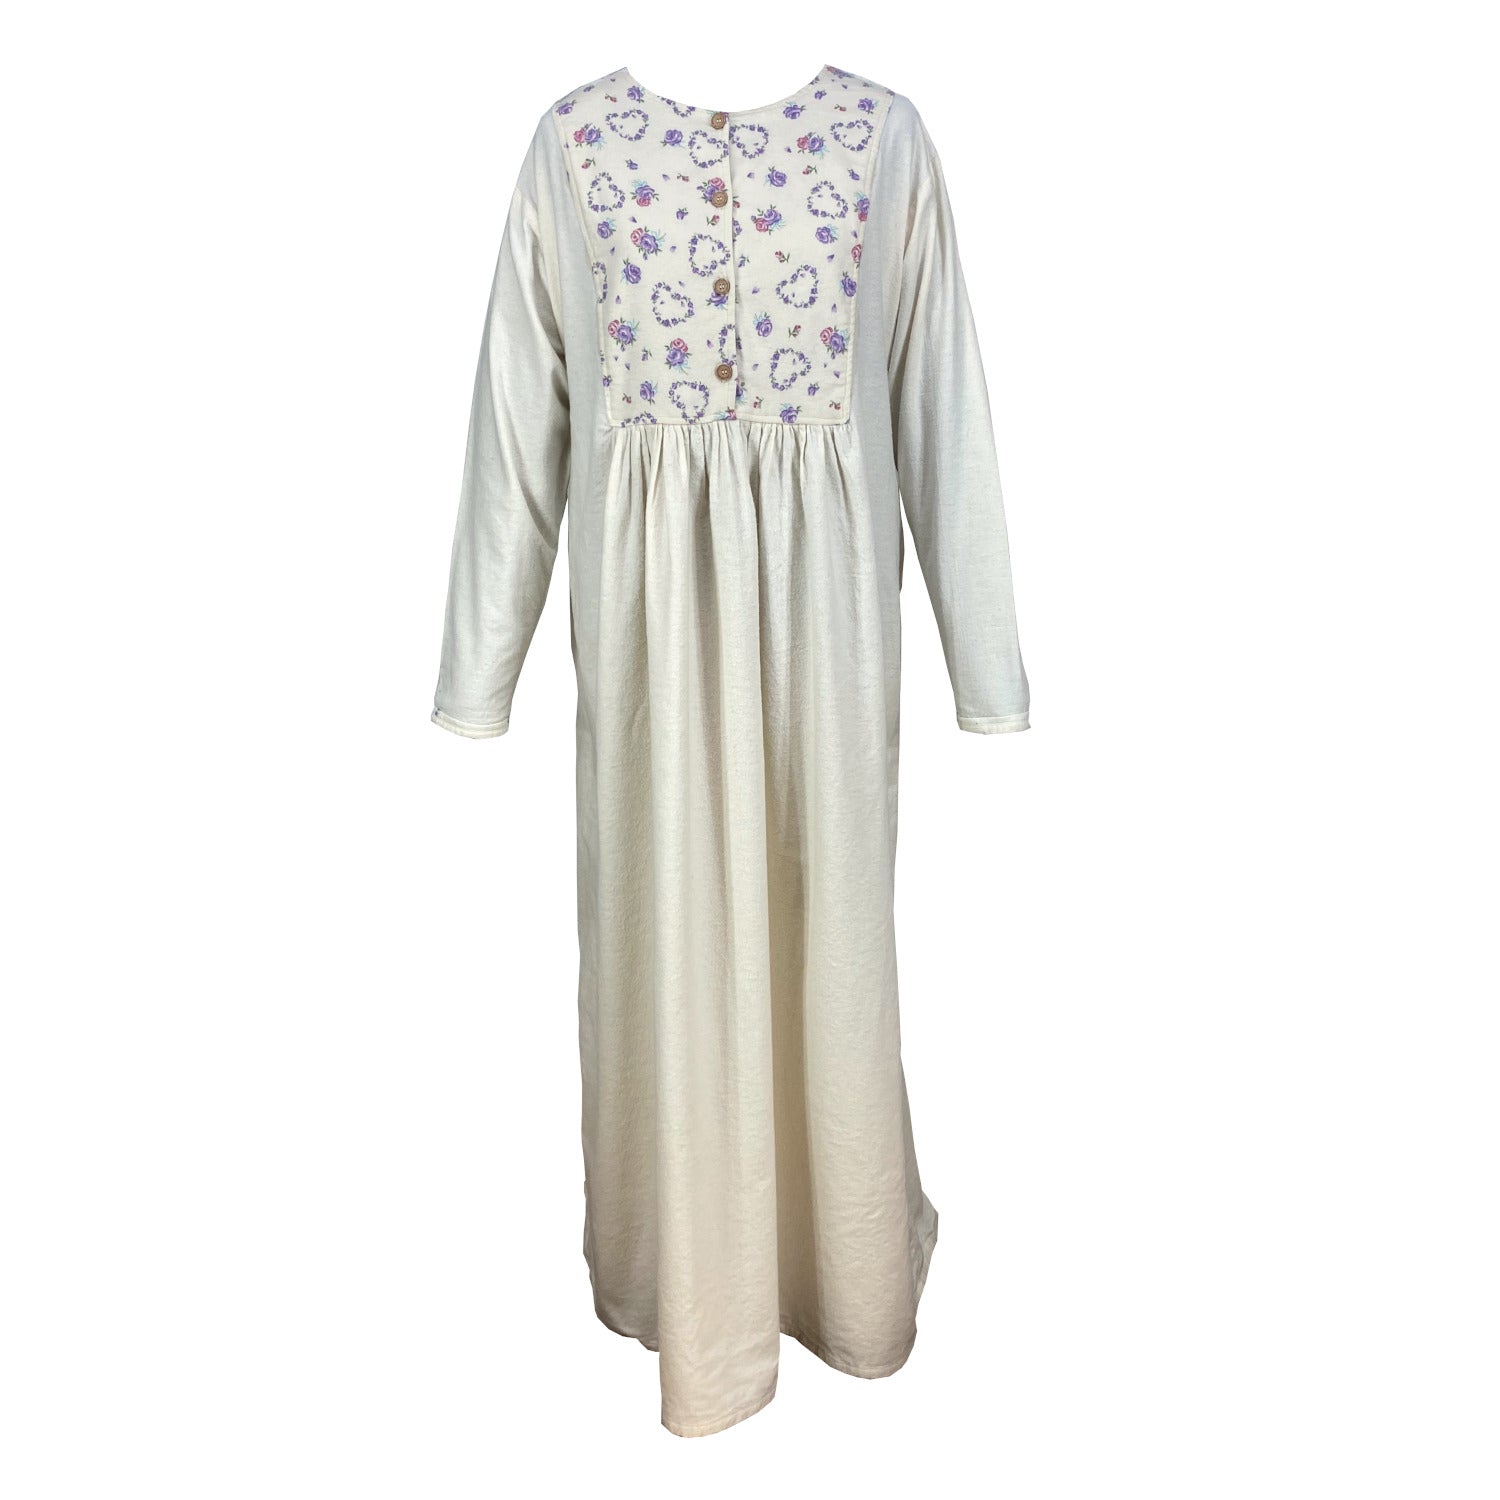 SQUARE-YOKED GOWN, FLORAL HEARTS YOKE